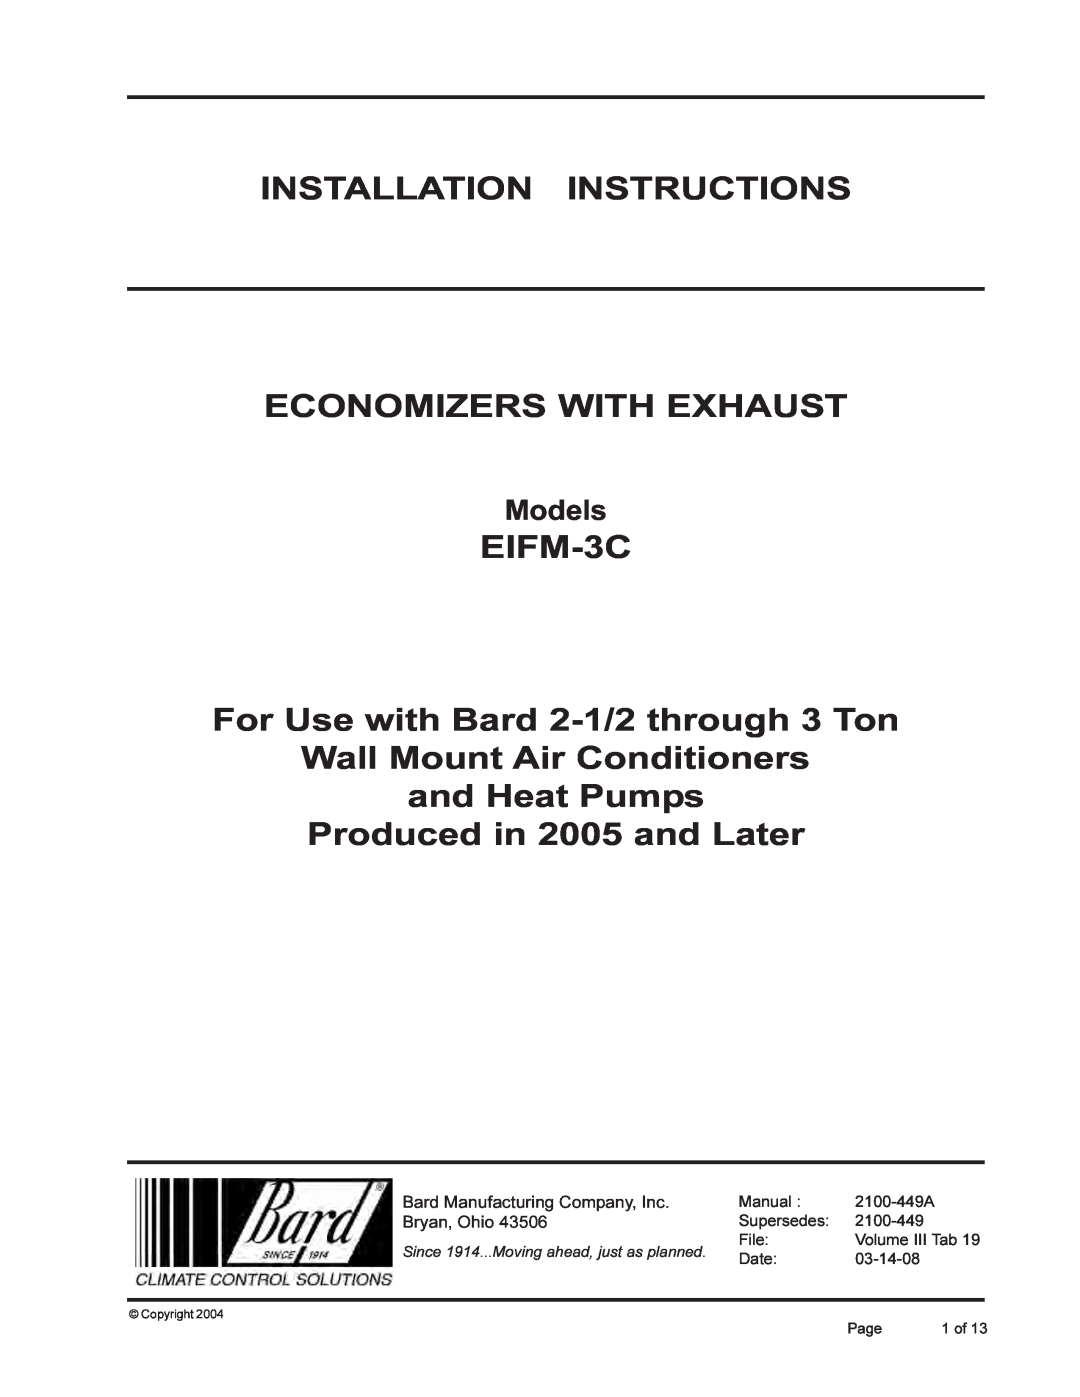 Bard EIFM-3C installation instructions Installation Instructions, Economizers With Exhaust, Produced in 2005 and Later 